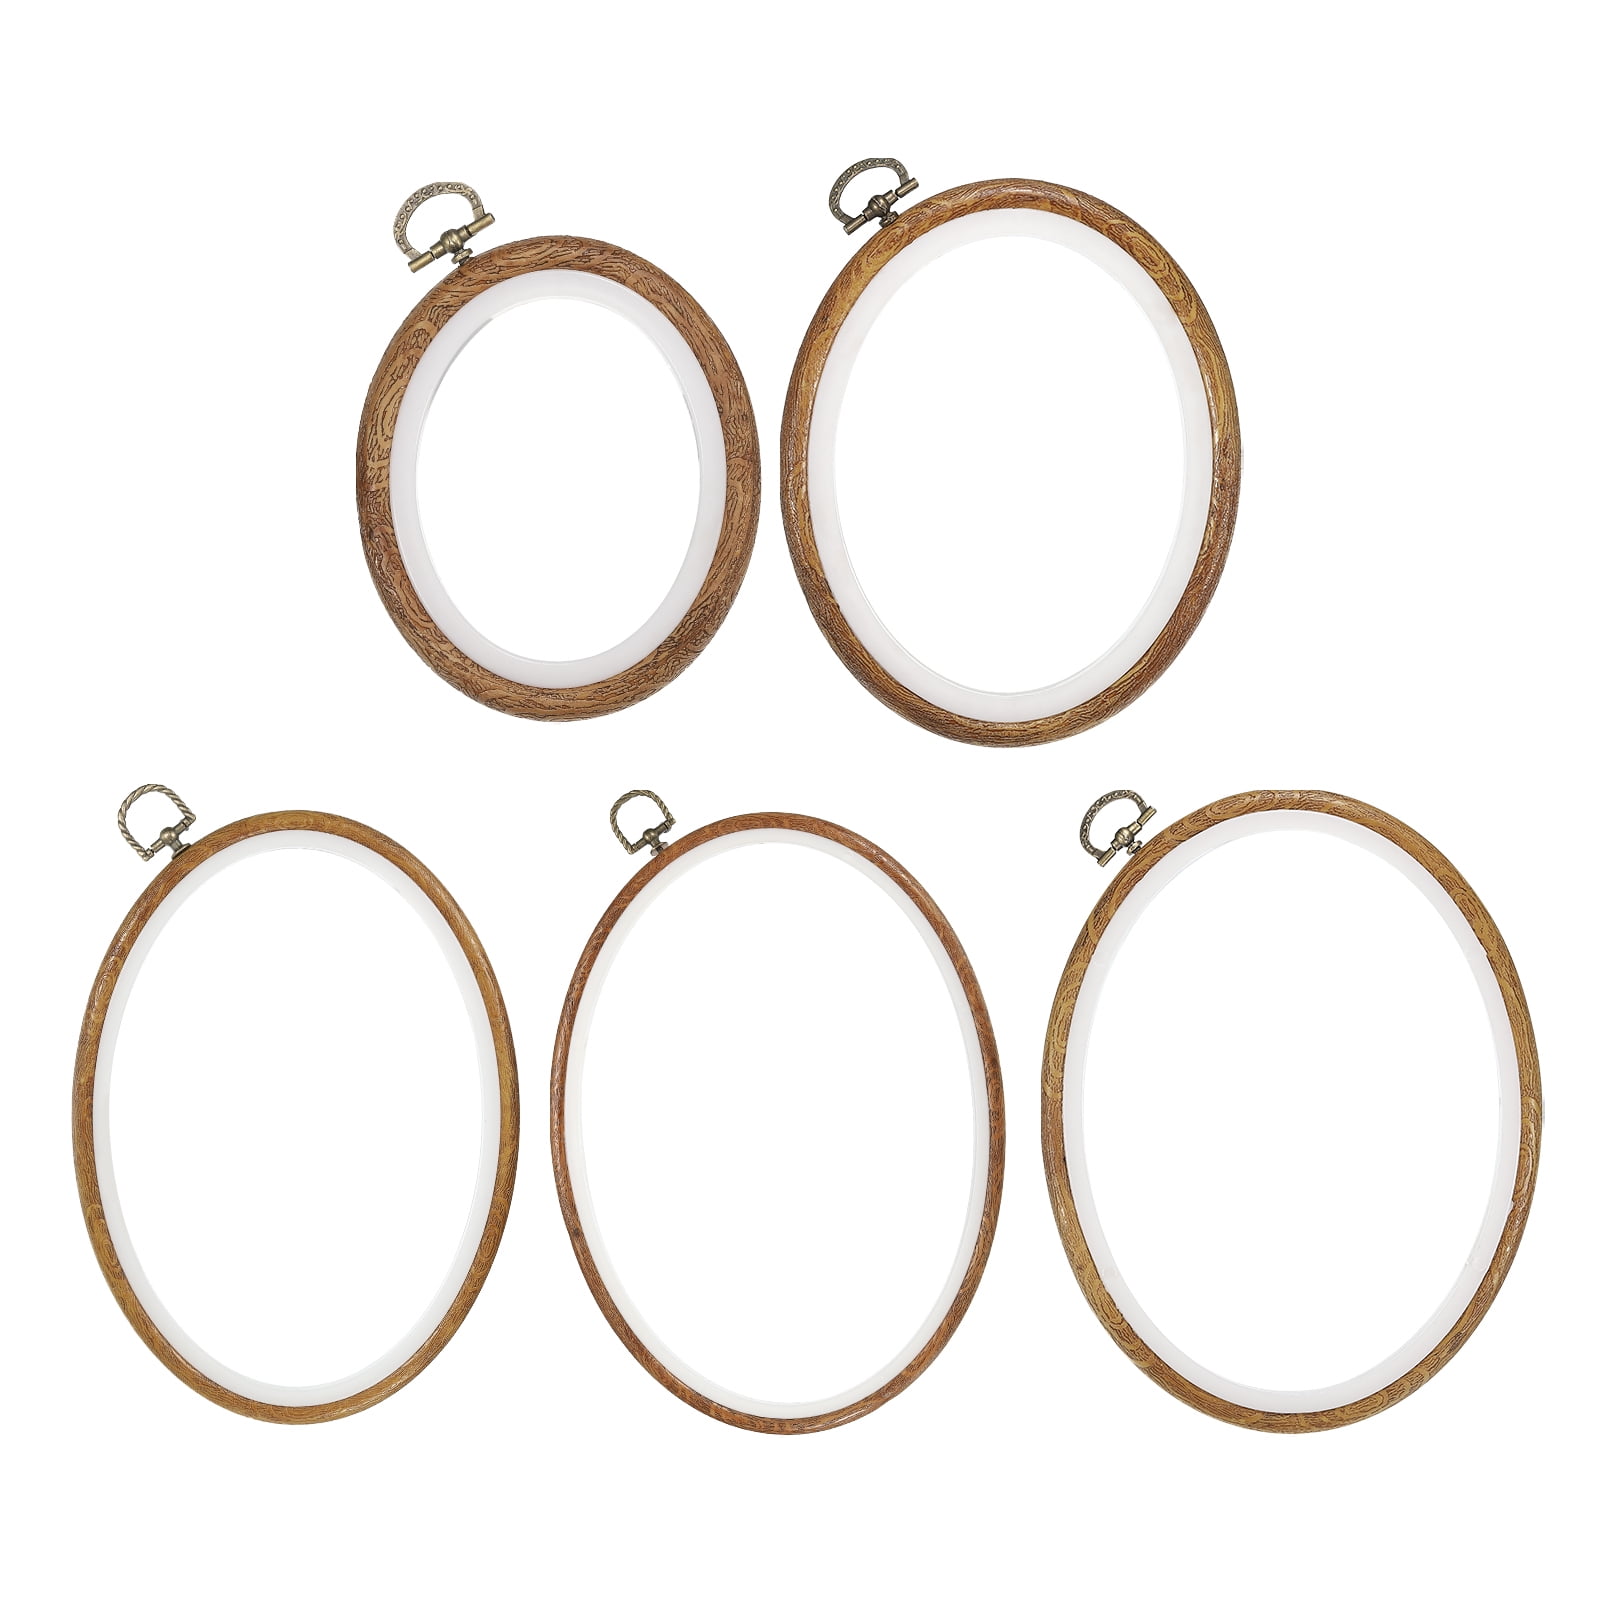  Qunclay 9 Pcs Large Embroidery Hoop Frame Decorative Imitated  Wood Display Frame Circle Oval Octagonal Cross Stitch Hoop Ring for DIY Art  Craft Sewing and Hanging Ornaments Decor (Mixed Shape)